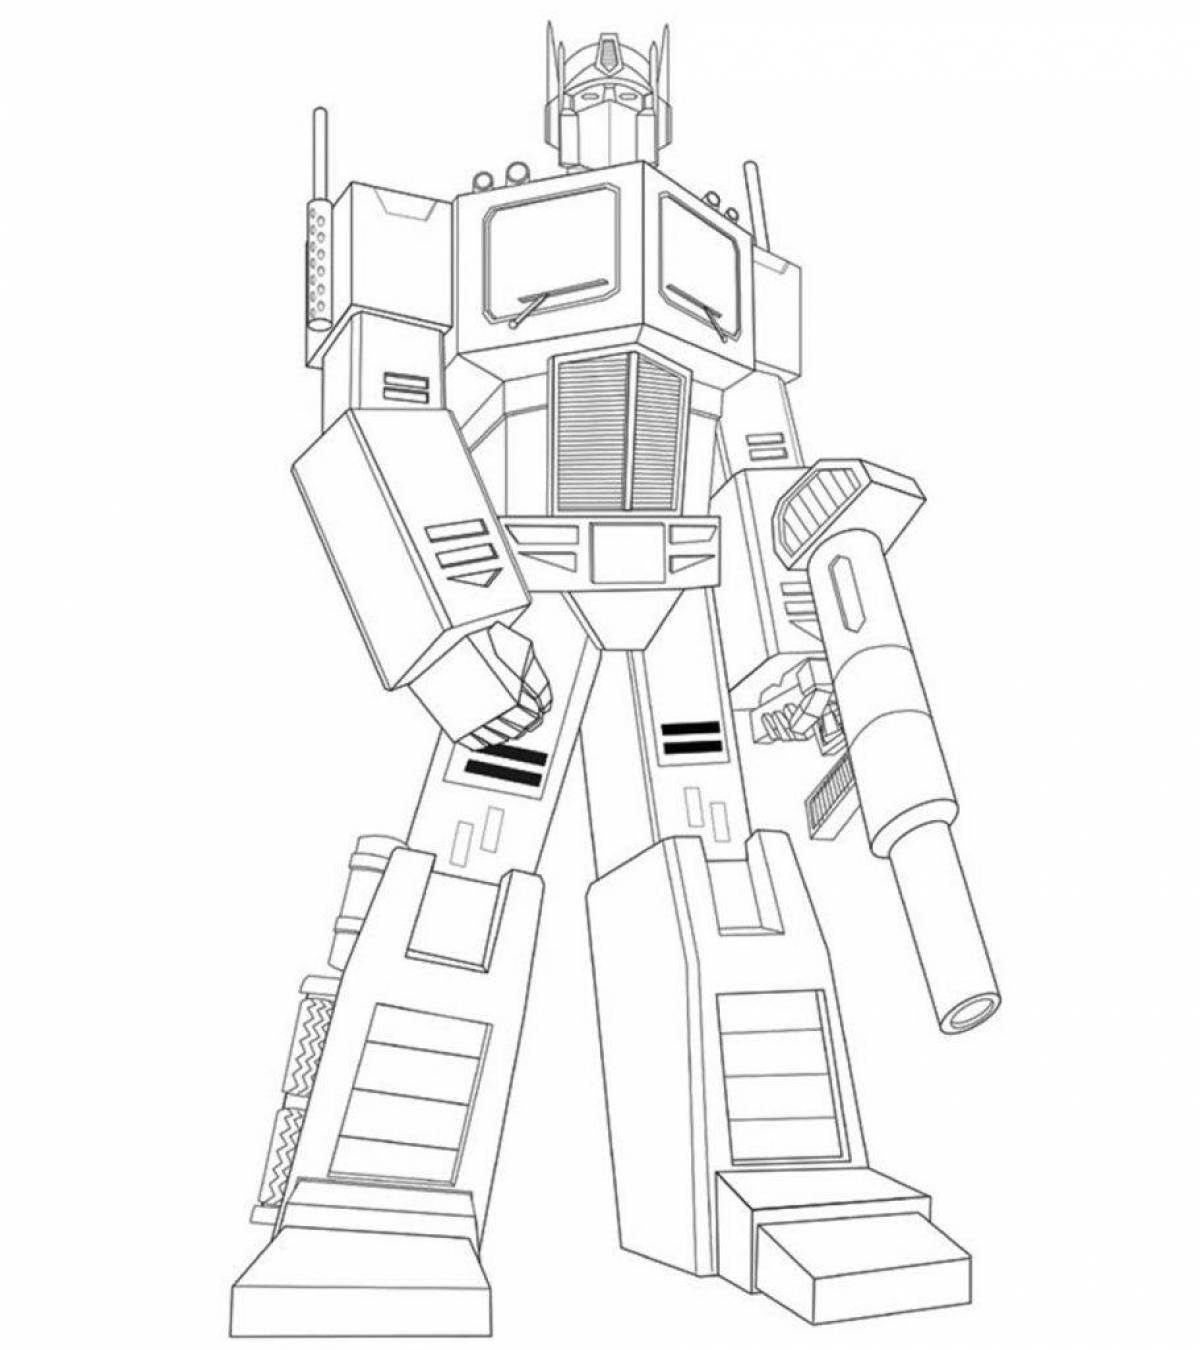 Awesome Optimus Prime coloring book for kids